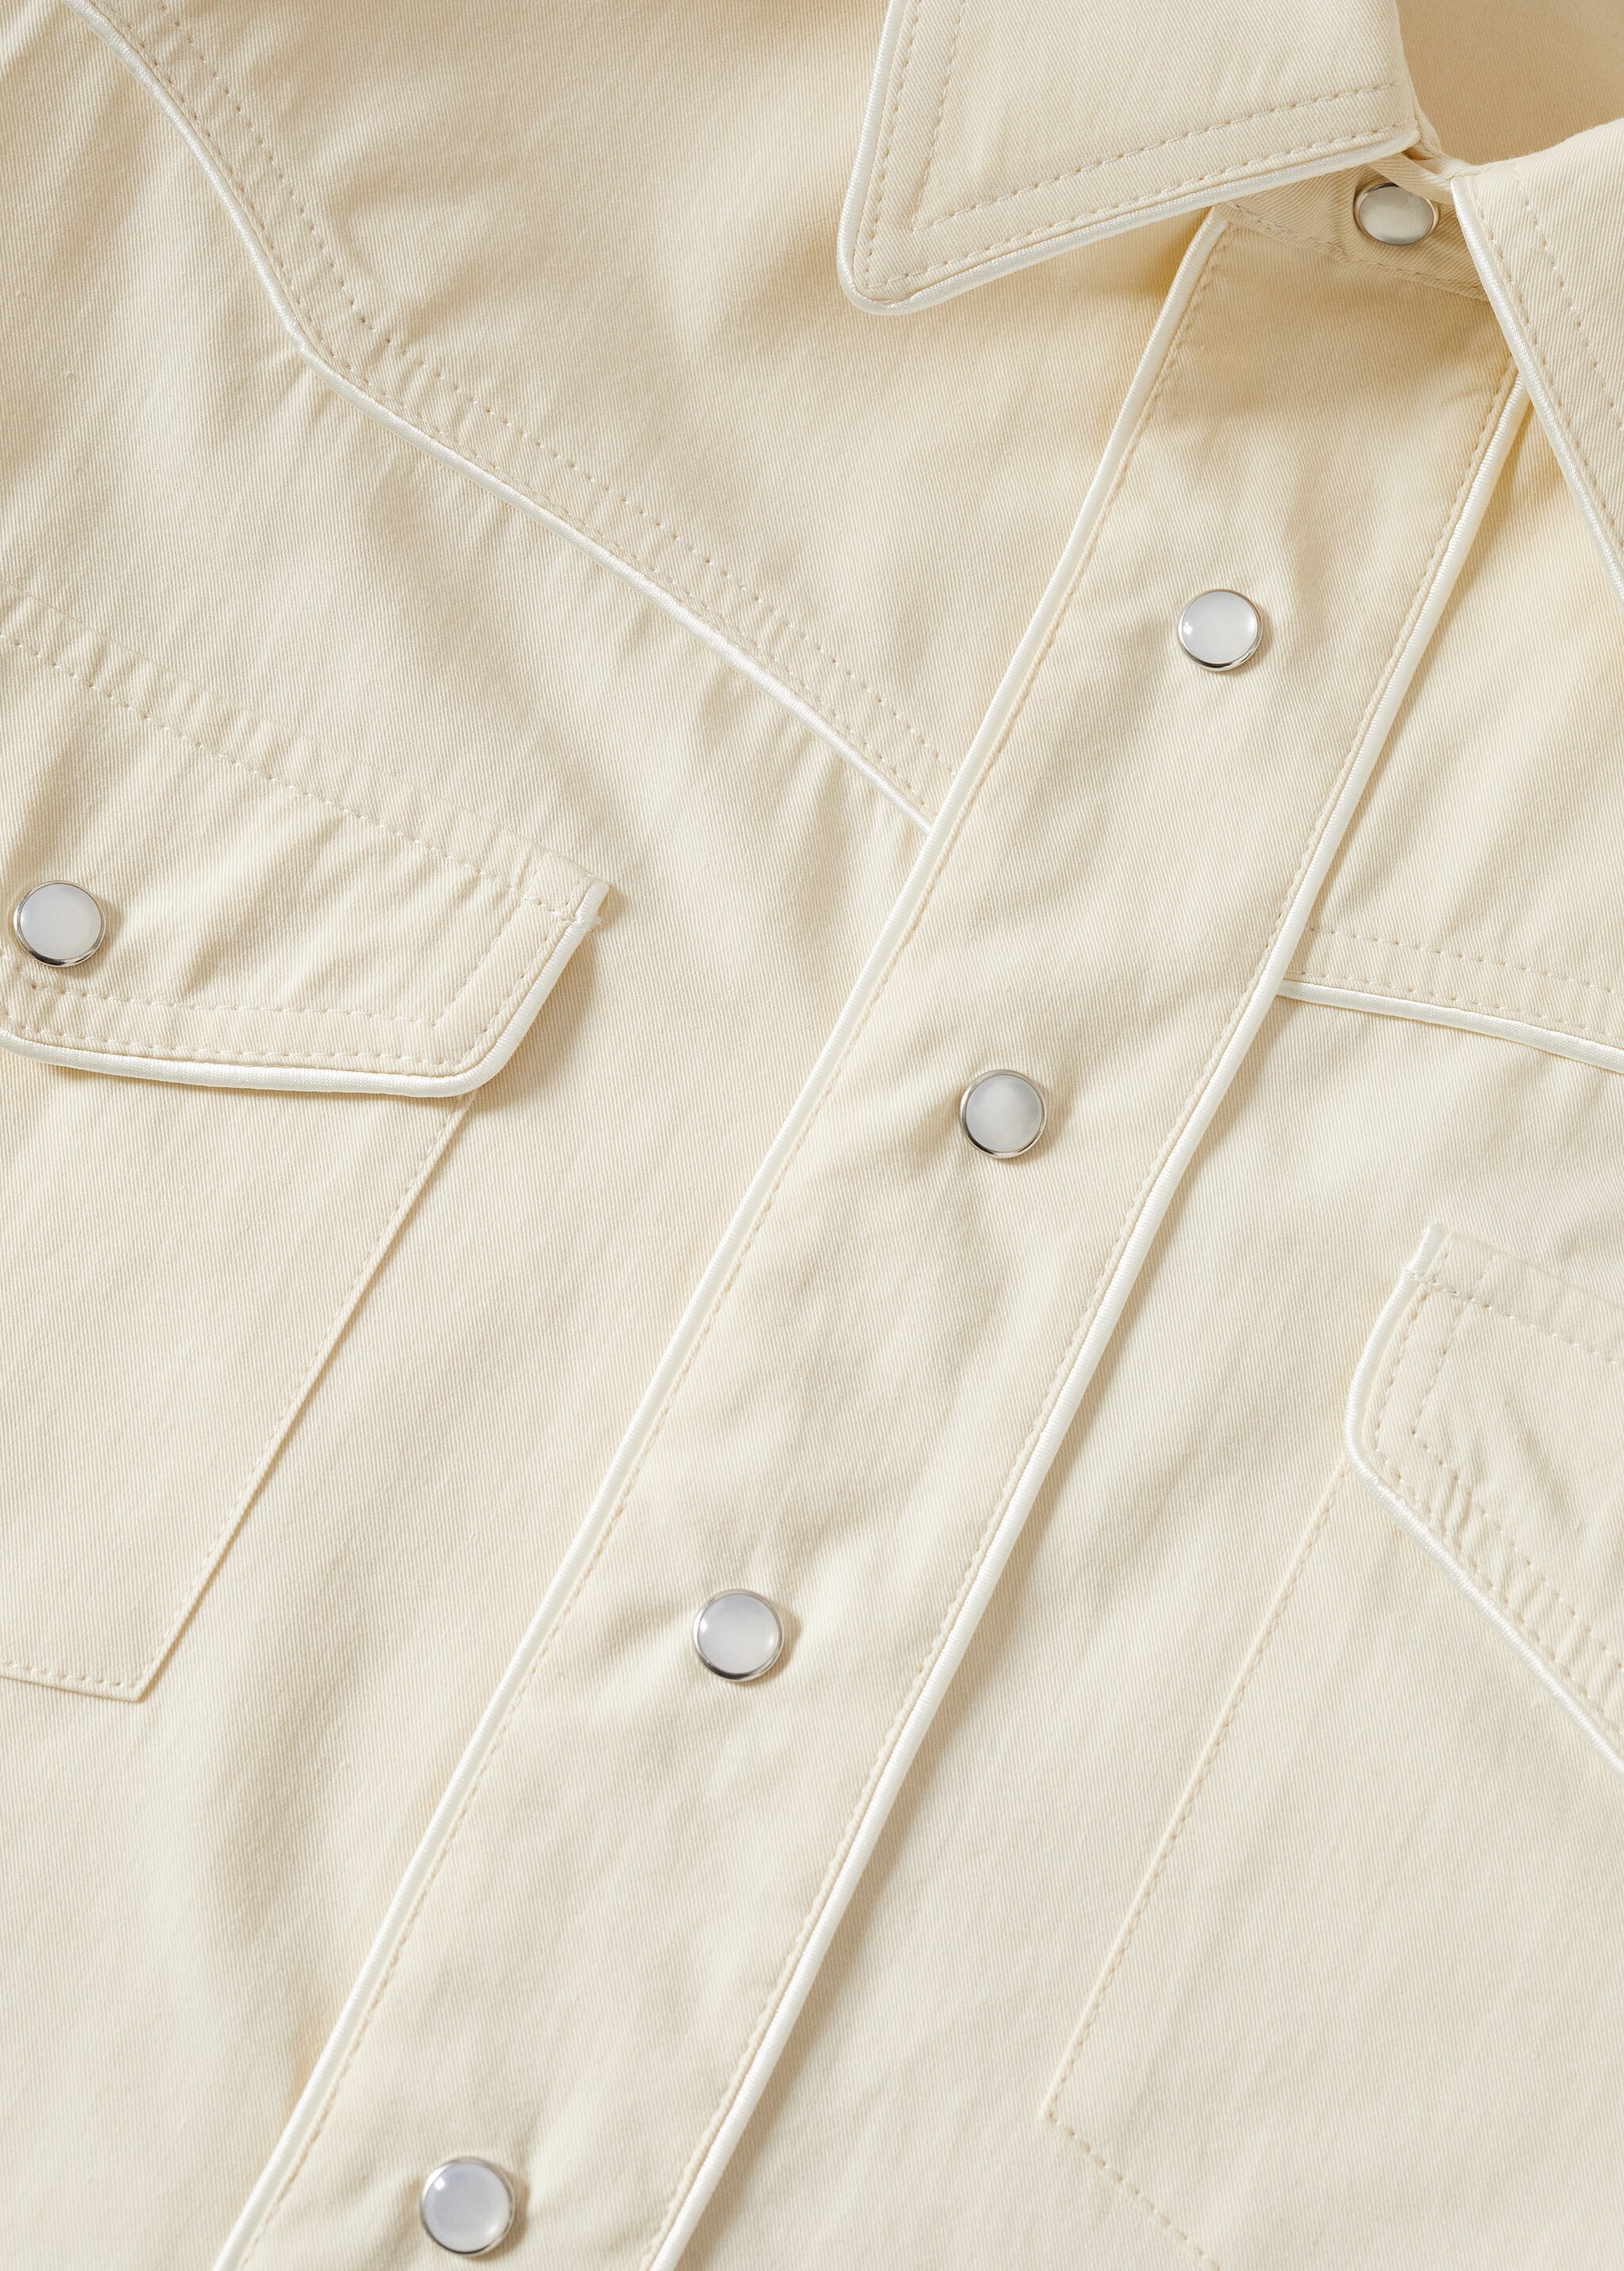 Cotton shirt with shoulder pads  - Details of the article 8